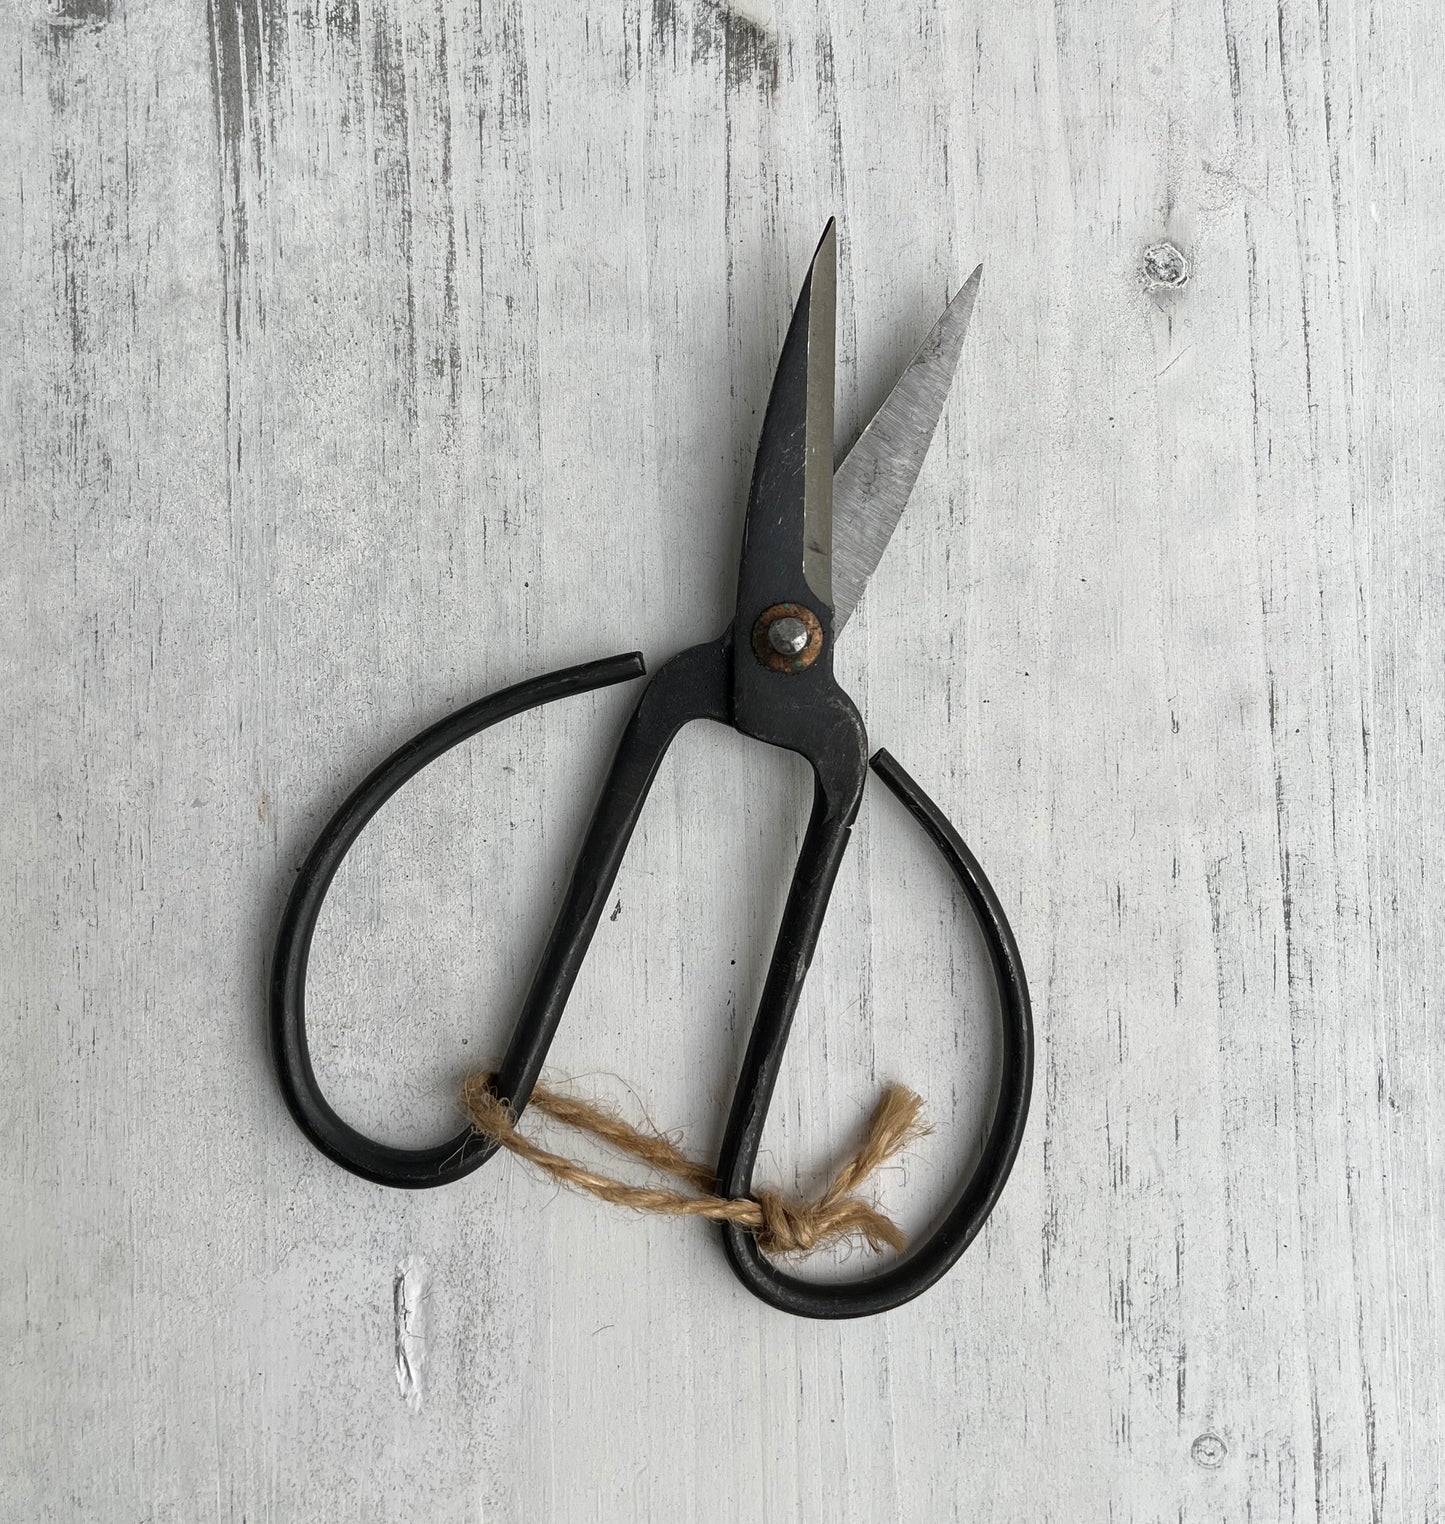 Vintage Old-World Rustic Hand Forged Iron Made Scissor For Cattle